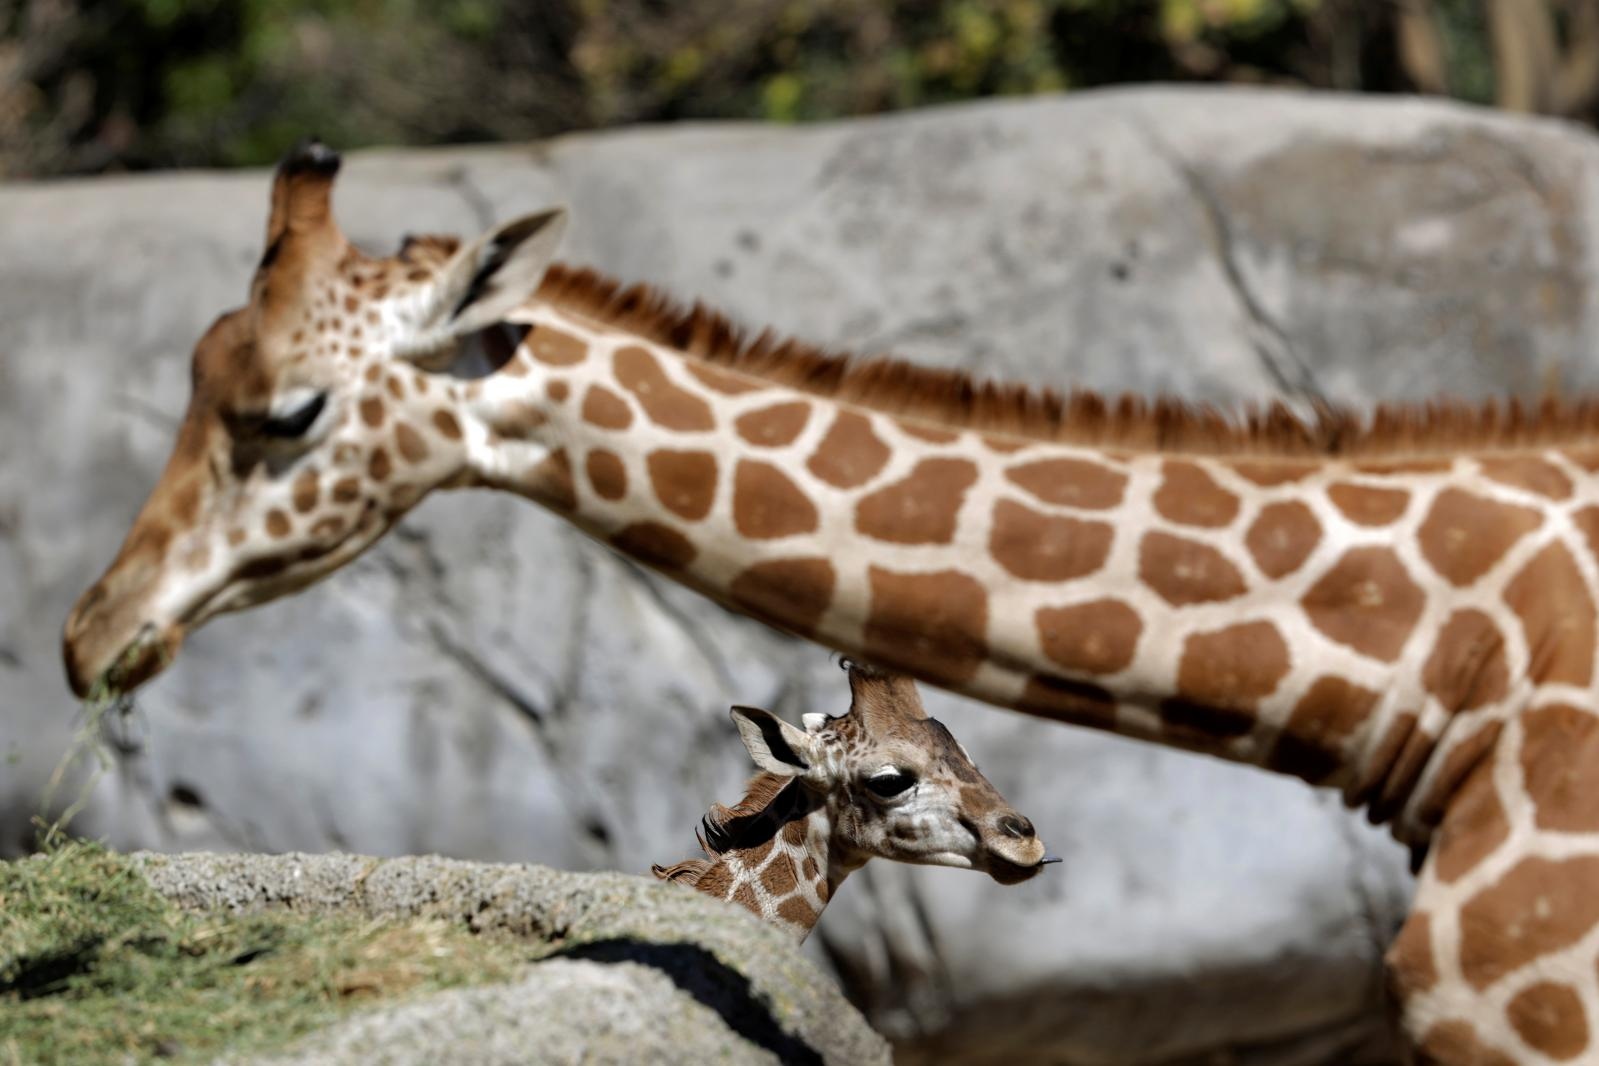 Baby giraffe is pictured at its enclosure at the Chapultepec zoo in Mexico City A baby giraffe is pictured at its enclosure at the Chapultepec zoo in Mexico City, Mexico January 10, 2020. REUTERS/Luis Cortes LUIS CORTES